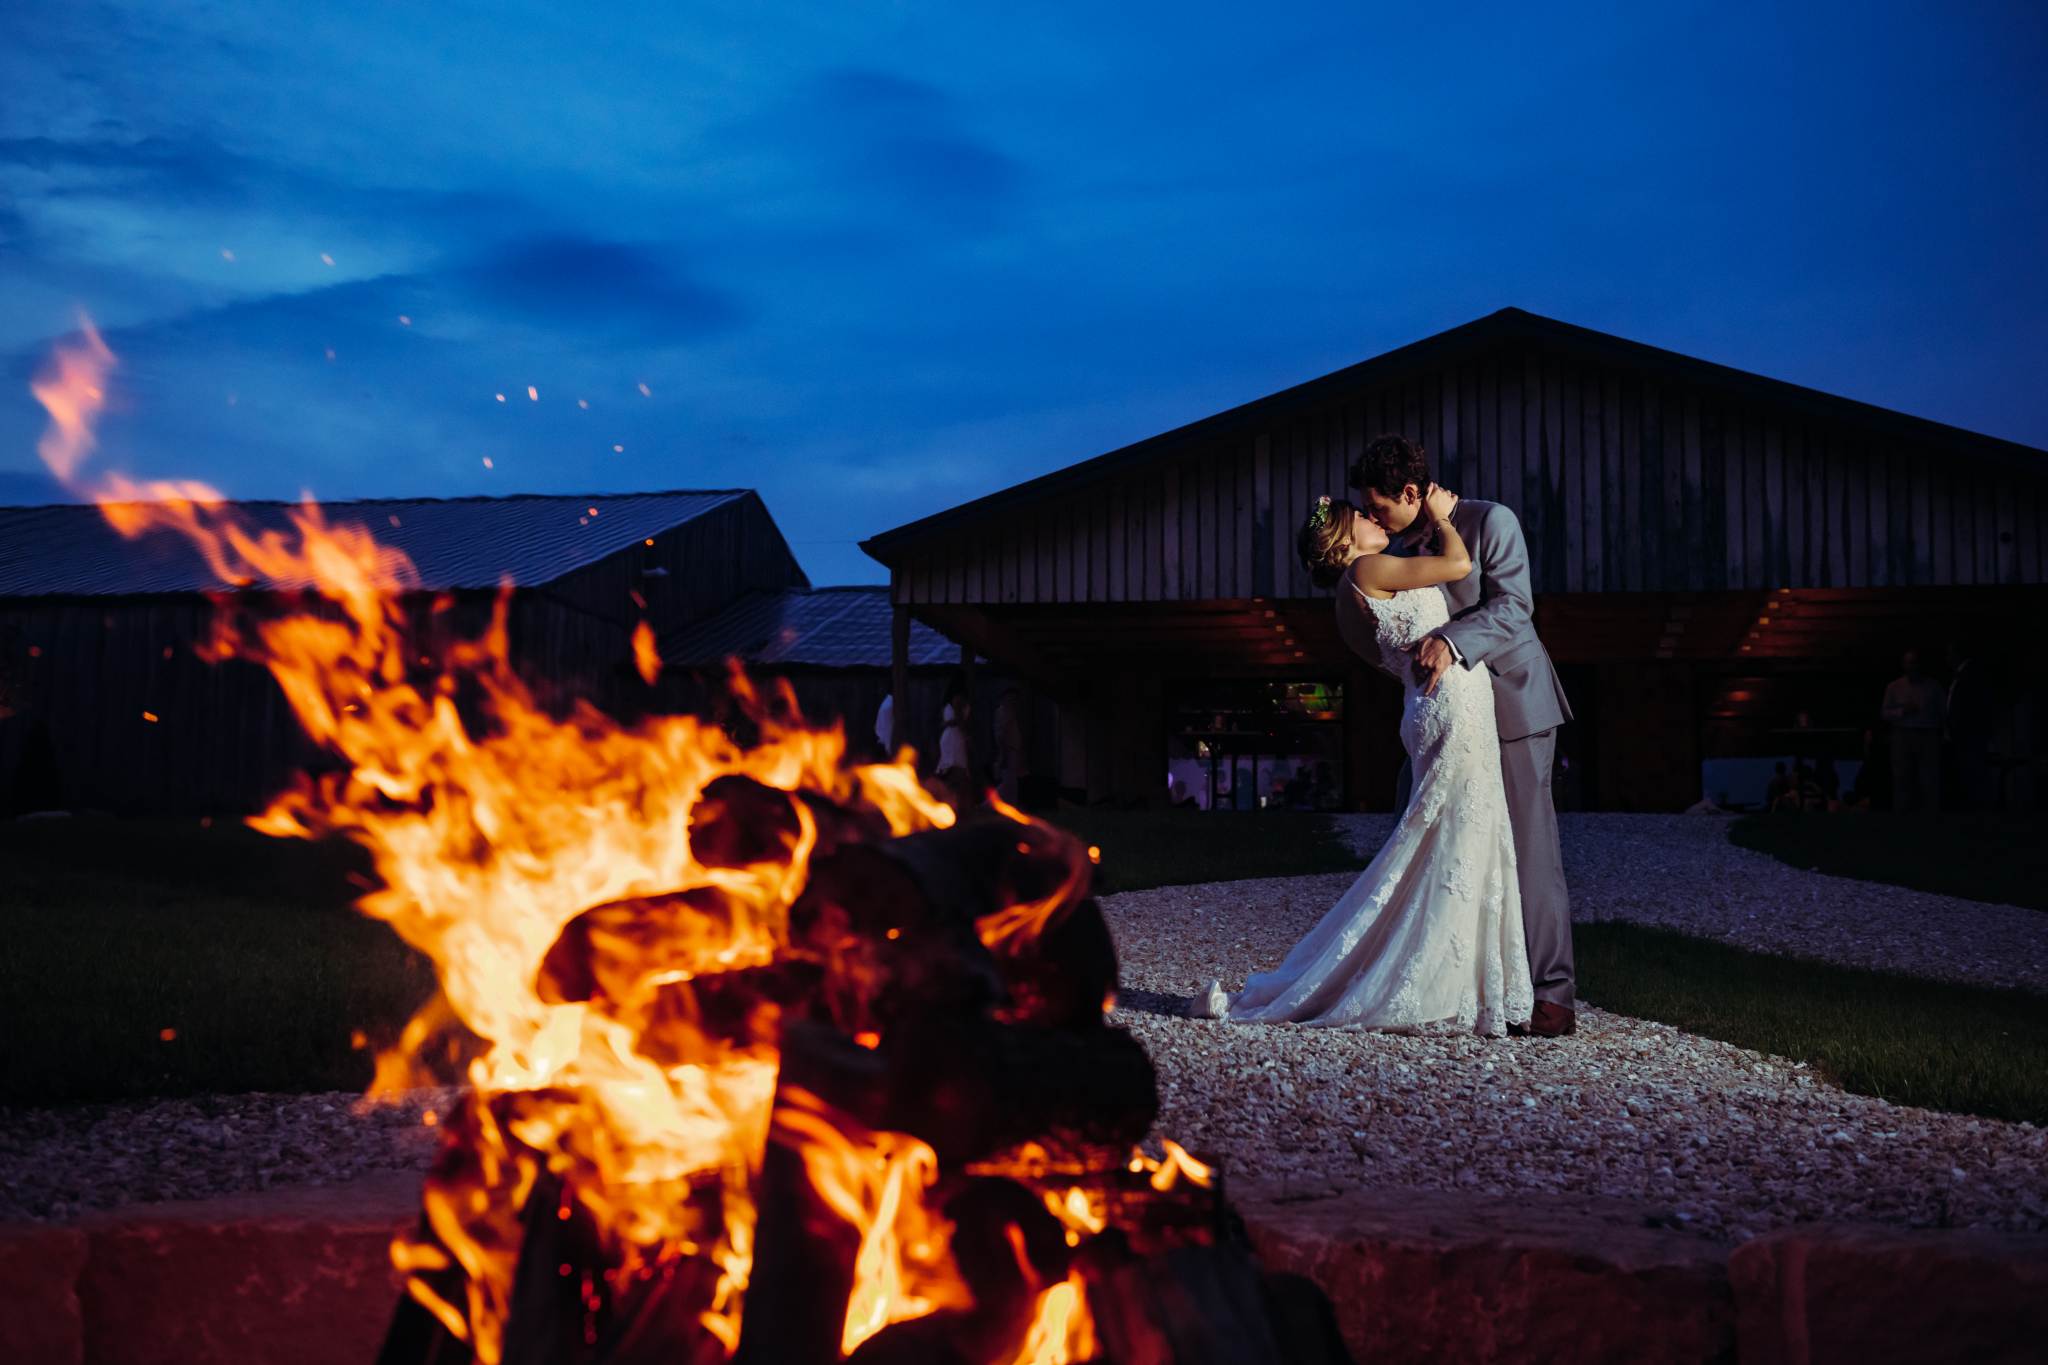 Bonfire and s'mores station at Cooper's Ridge outdoor wedding venue